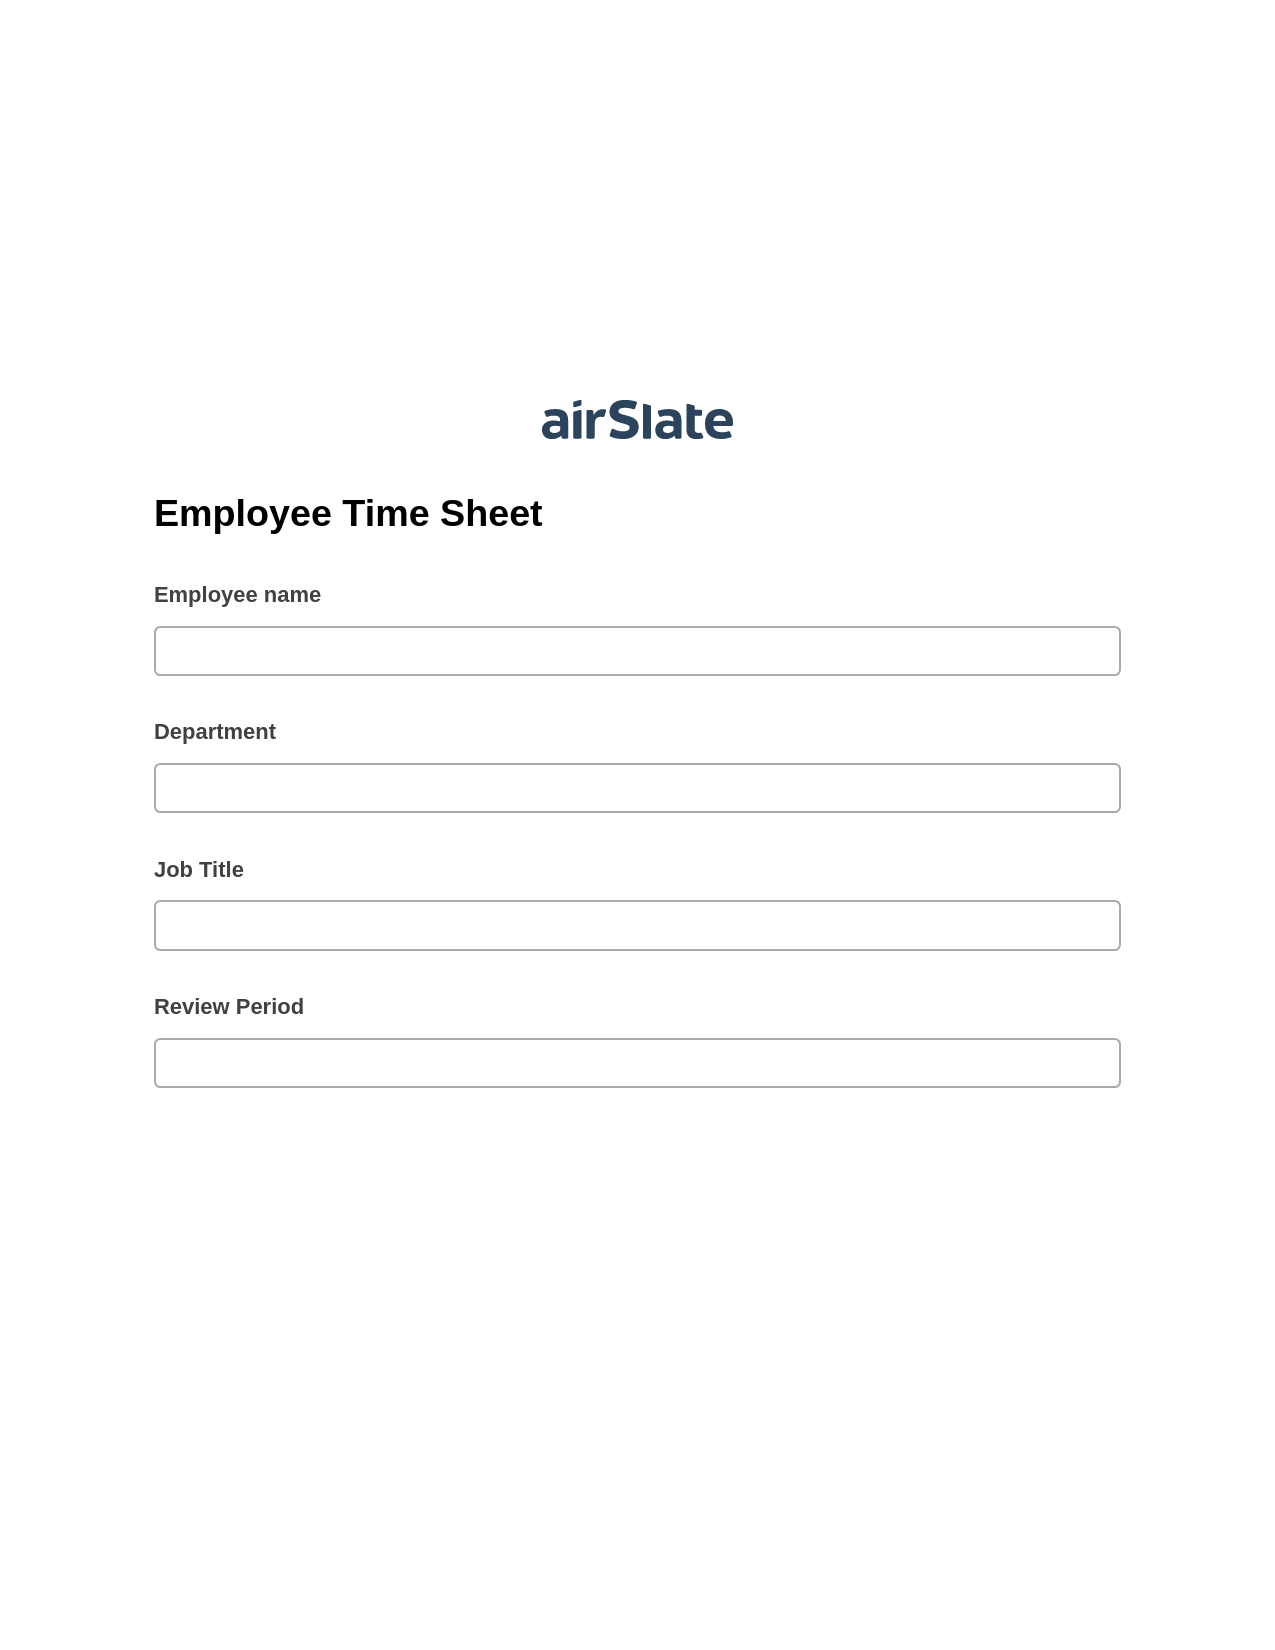 Employee Time Sheet Pre-fill Document Bot, Slack Notification Bot, Export to Excel 365 Bot